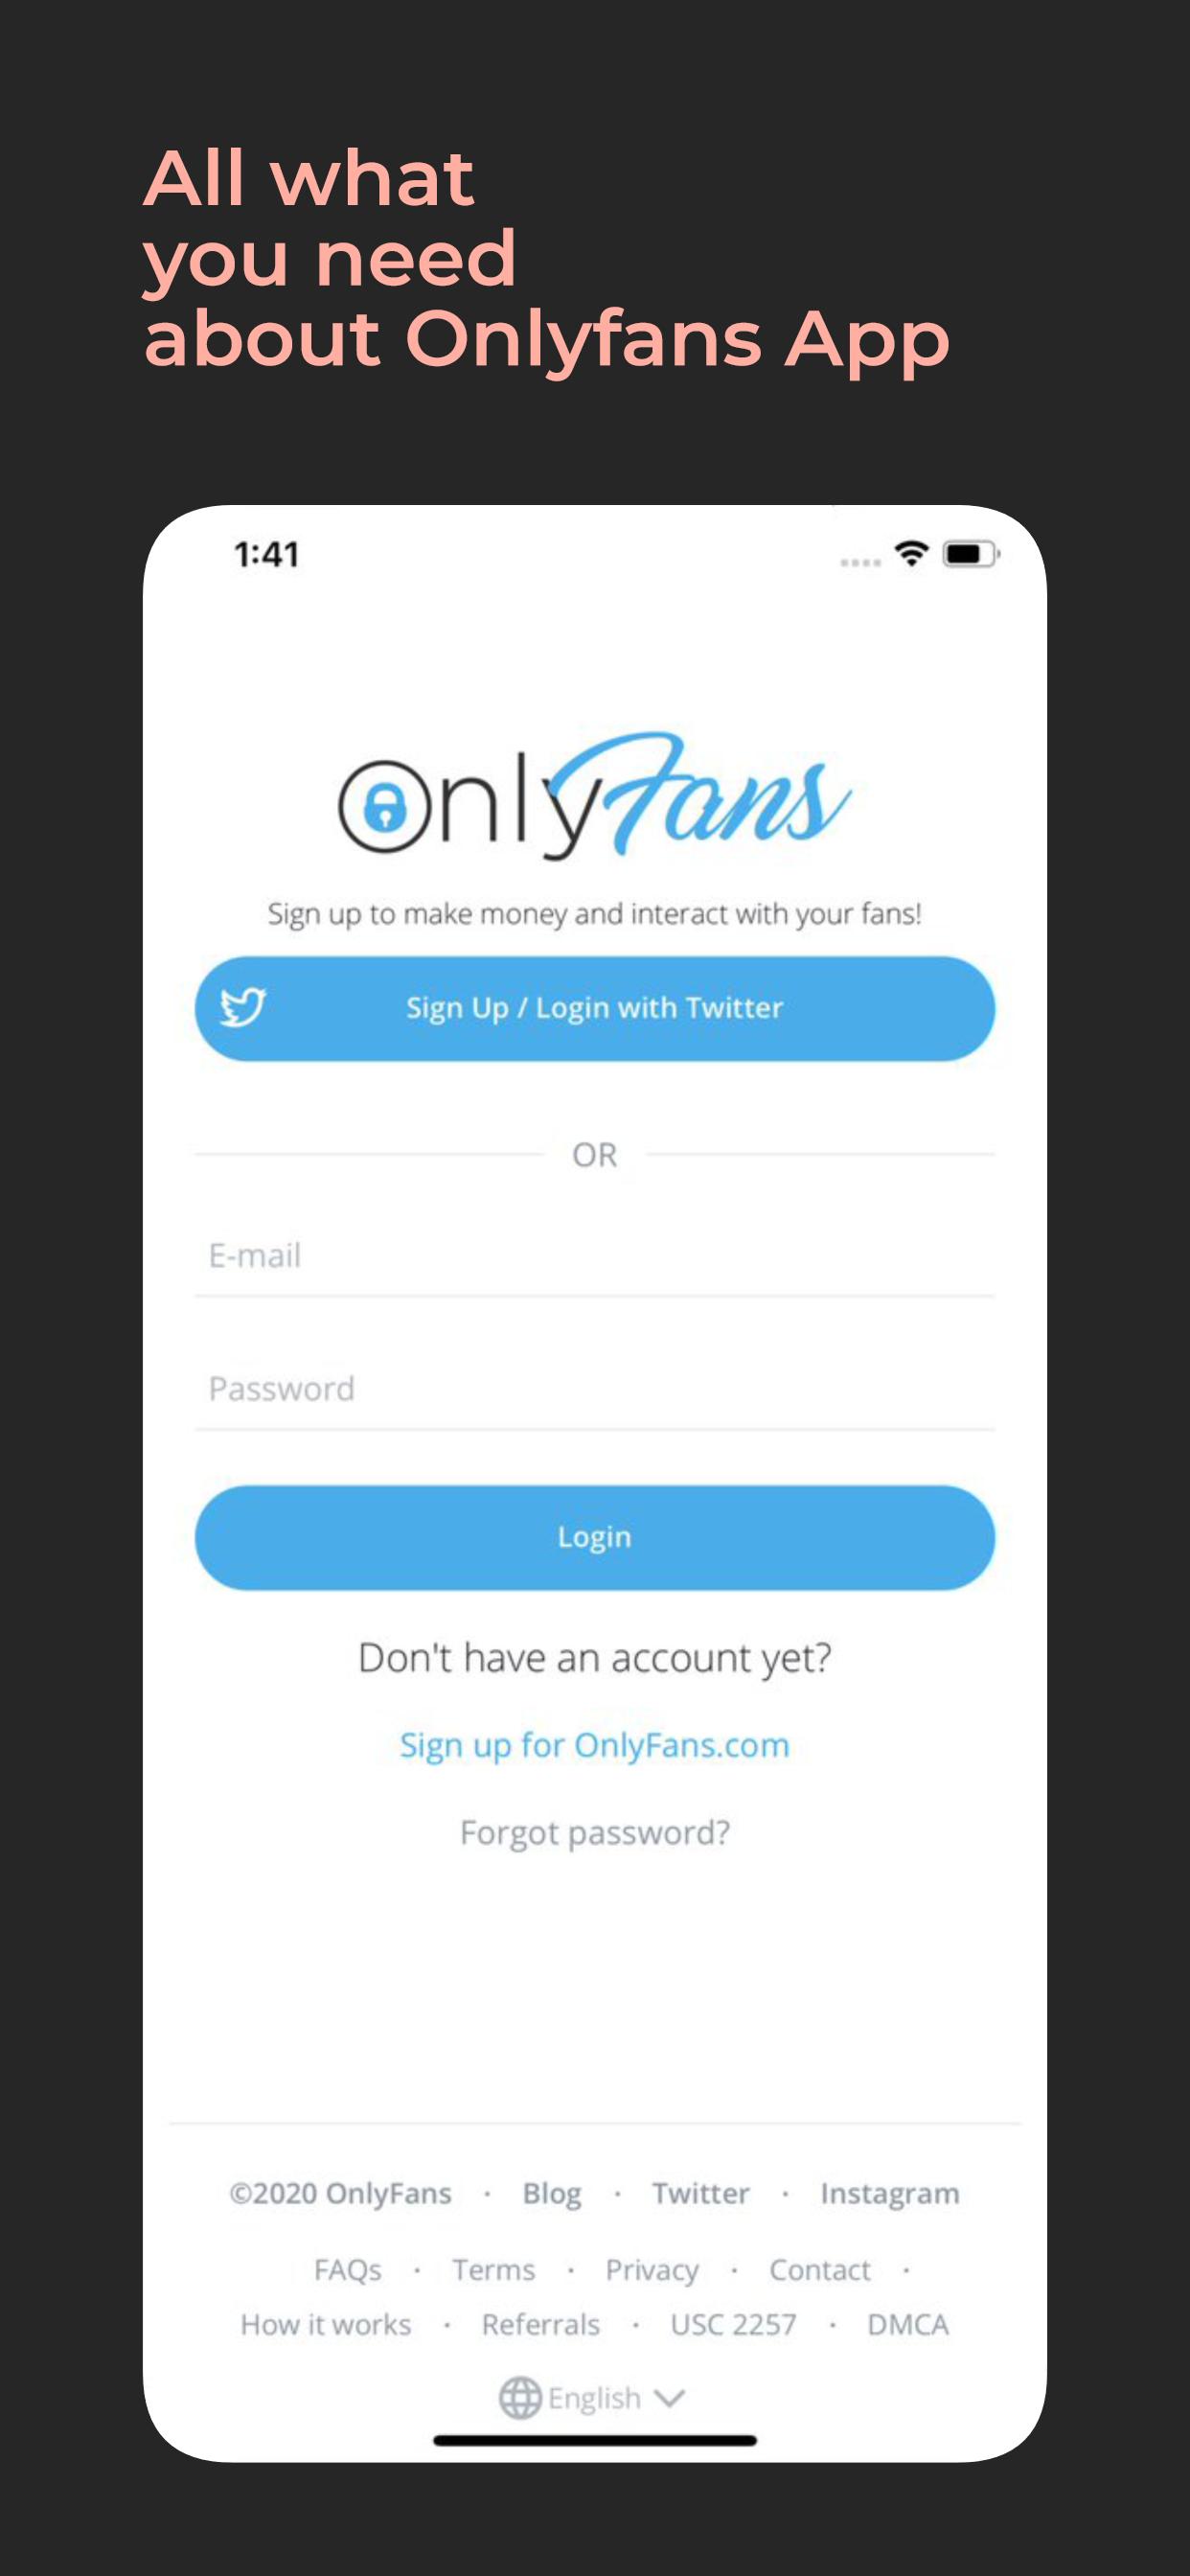 Onlyfans contact how to How to